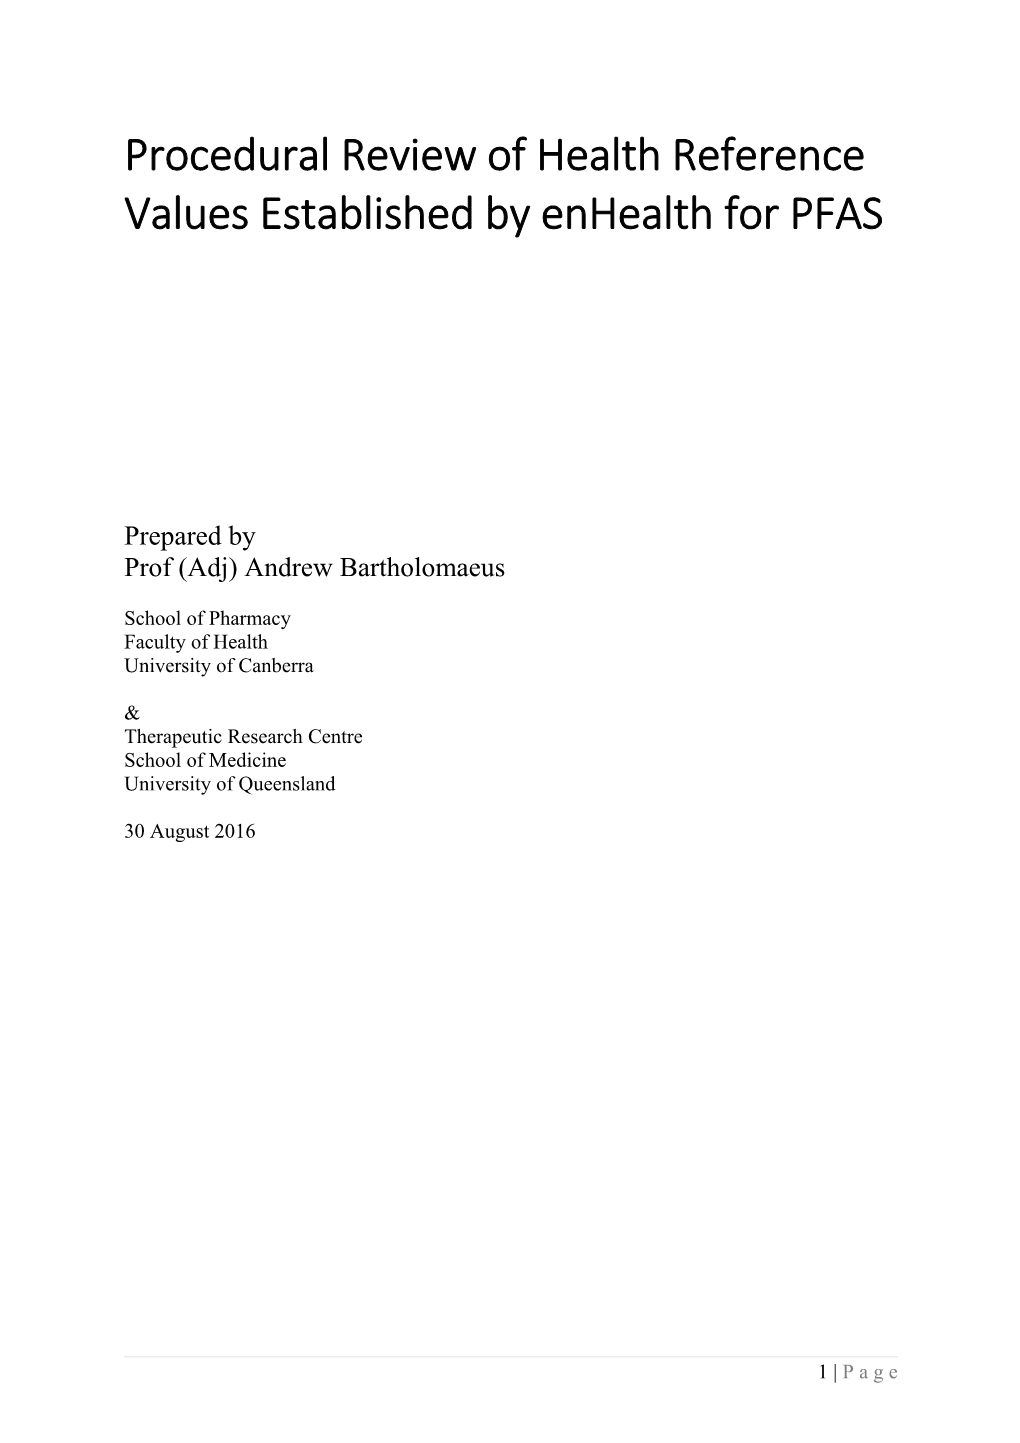 Procedural Review of Health Reference Values Established by Enhealth for PFAS